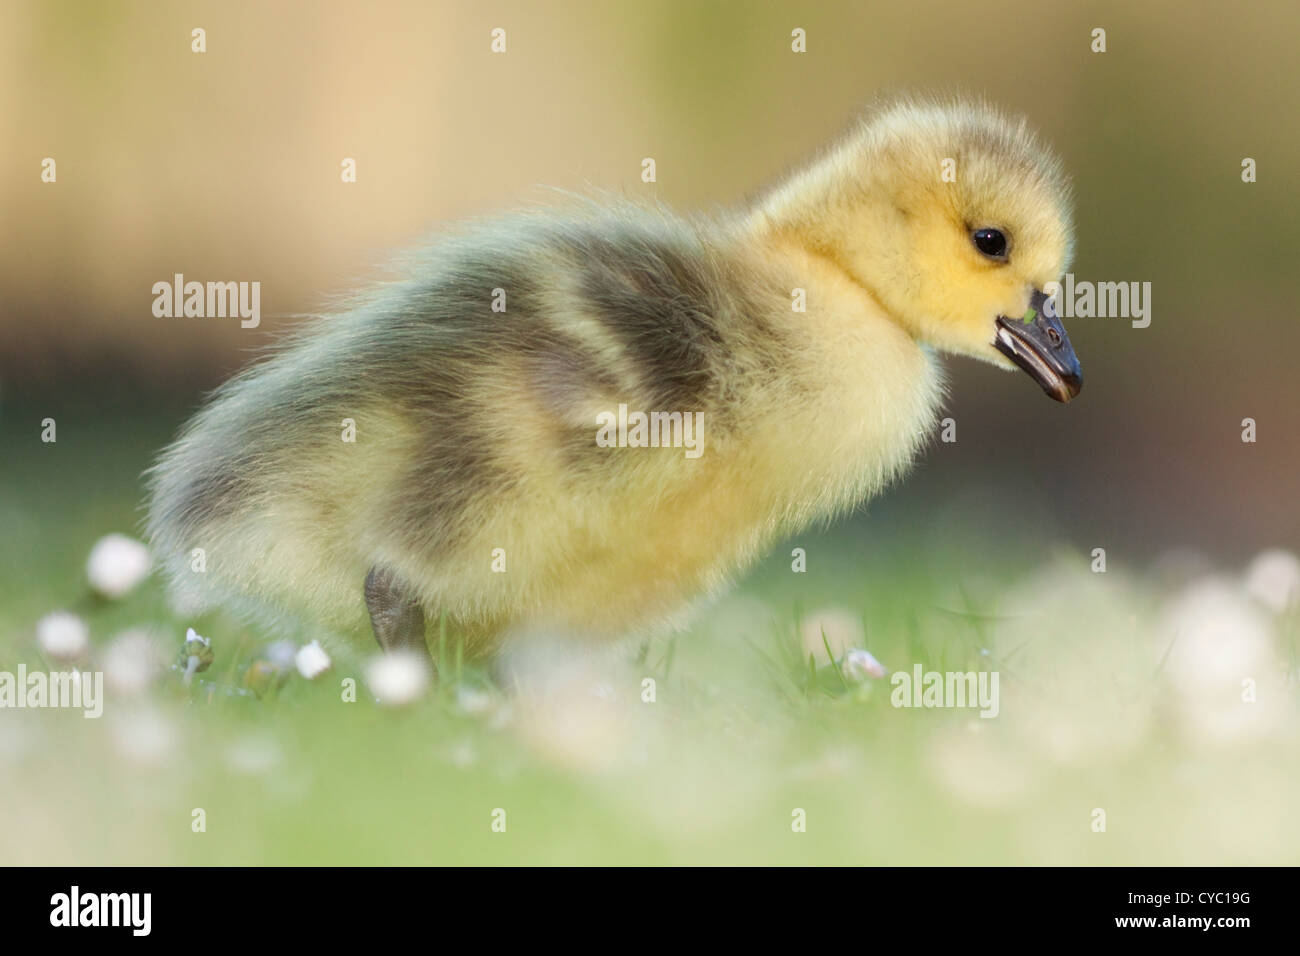 Gosling in some daisies Stock Photo